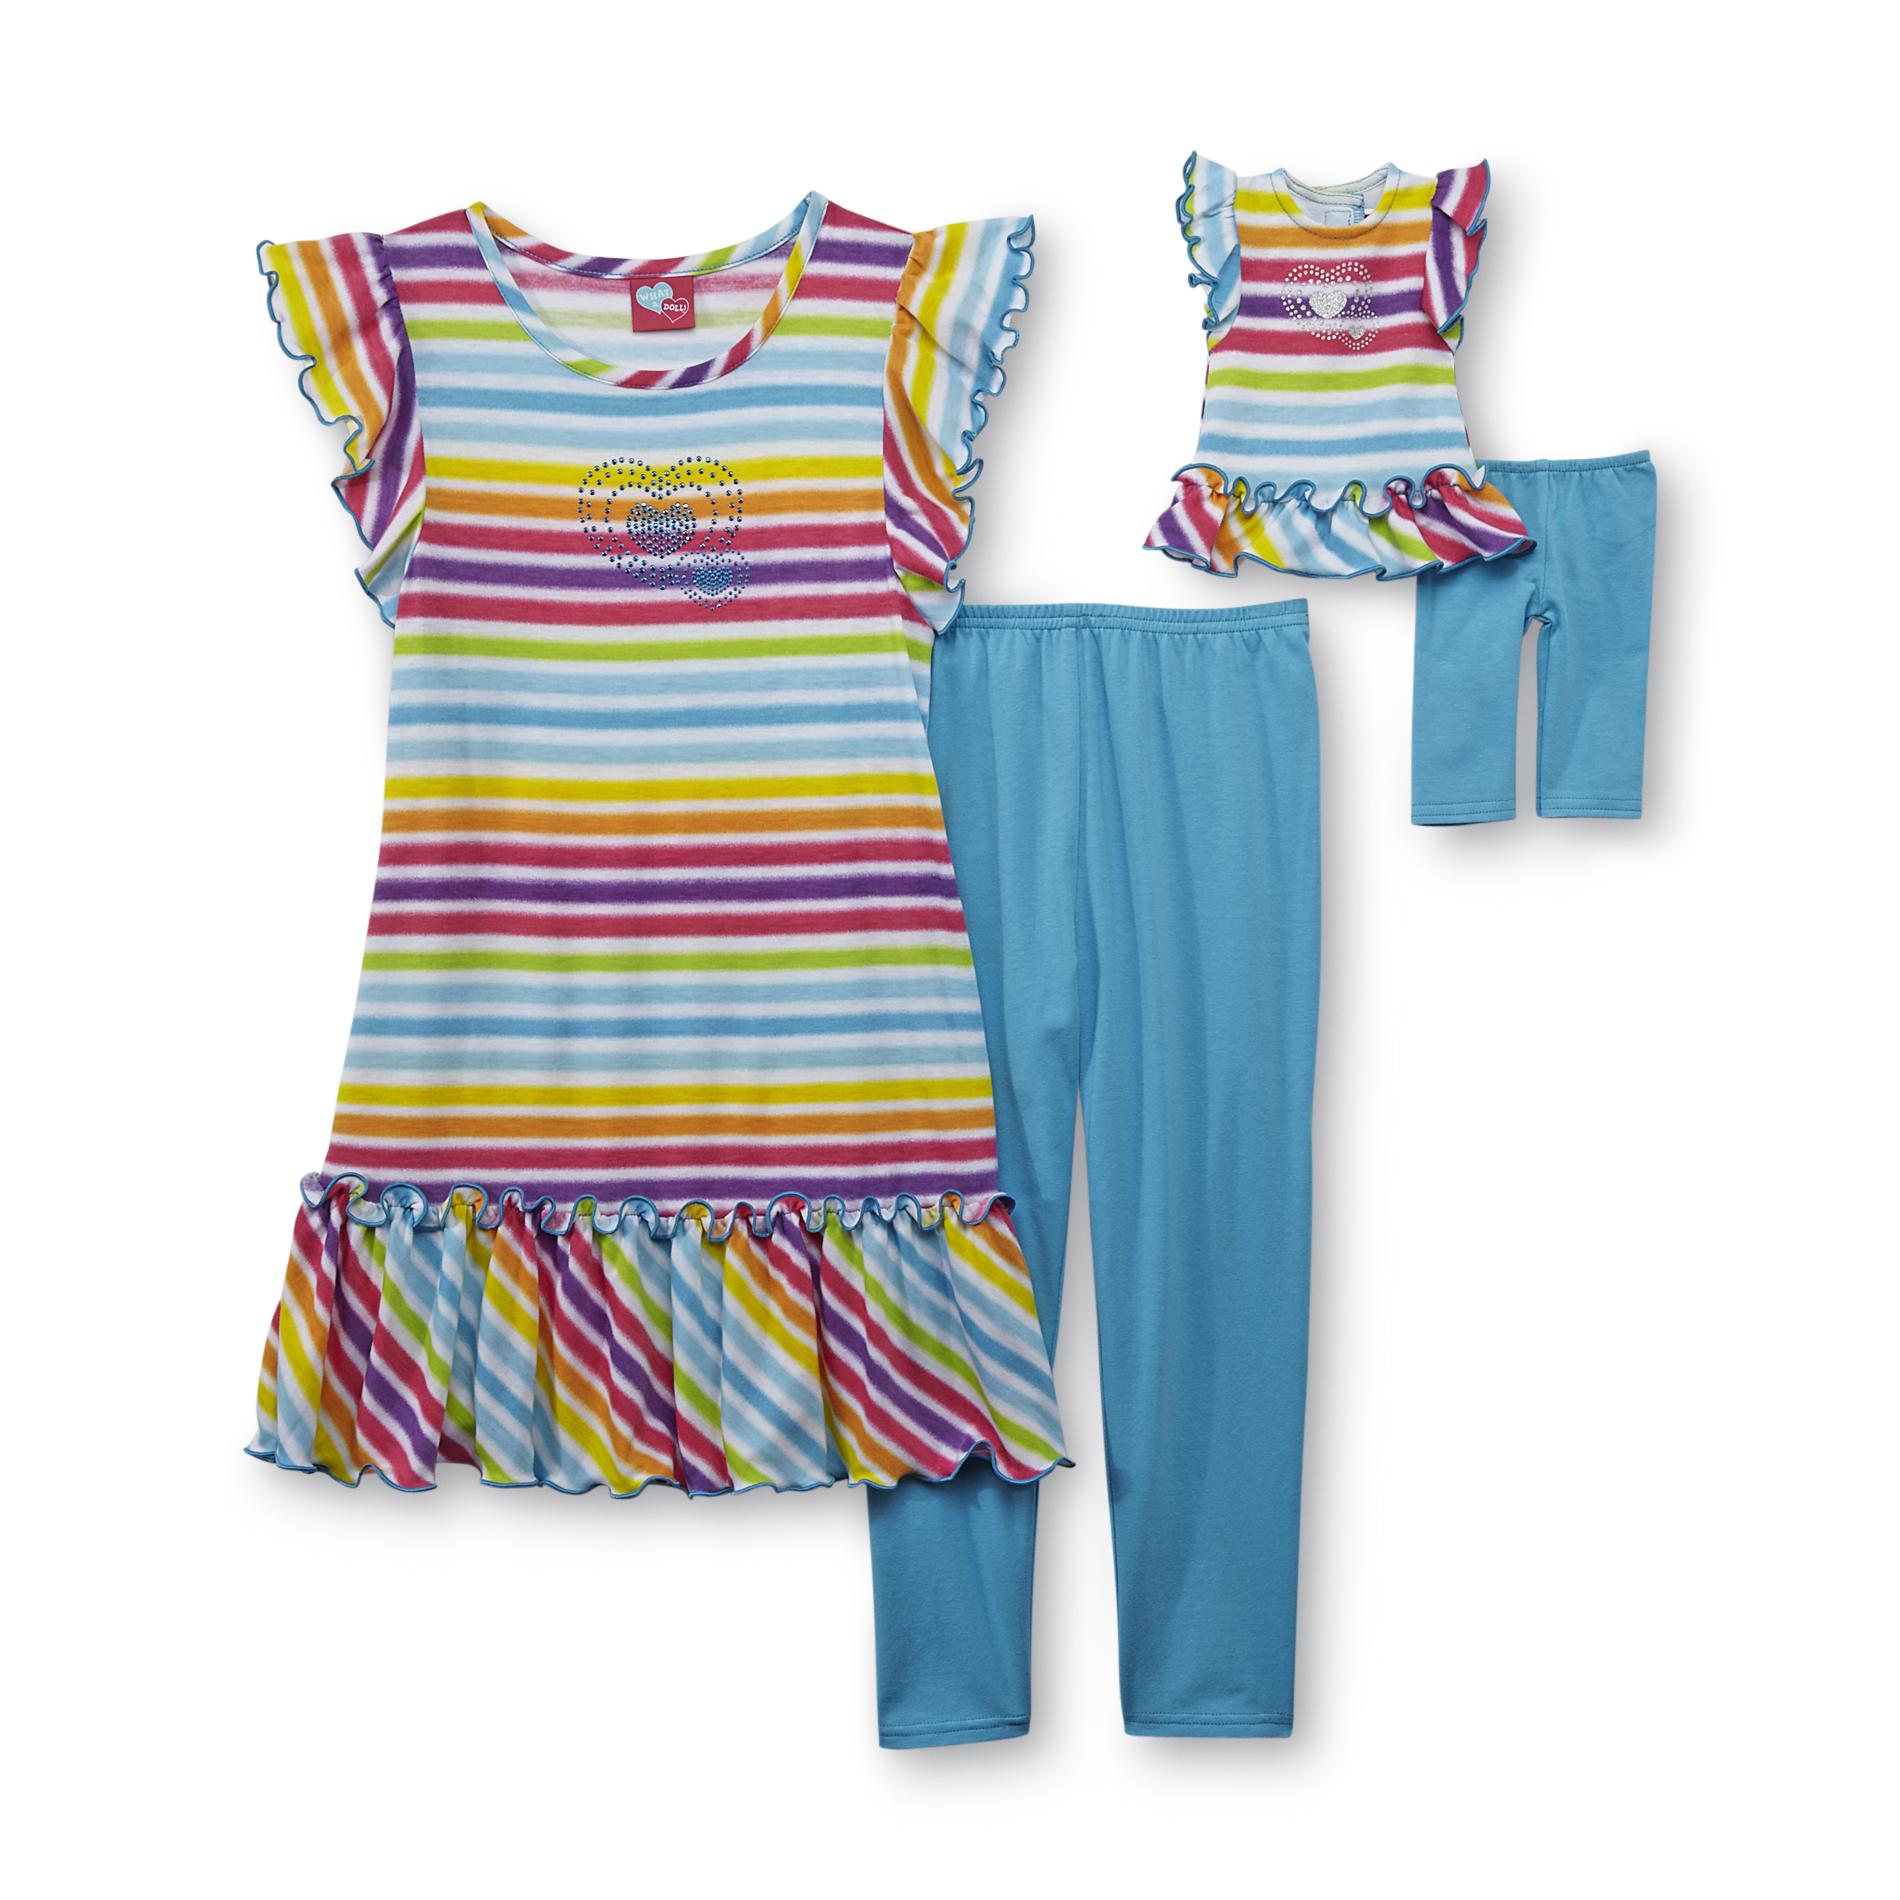 What A Doll Girl's Tunic  Leggings & Doll Outfit - Striped